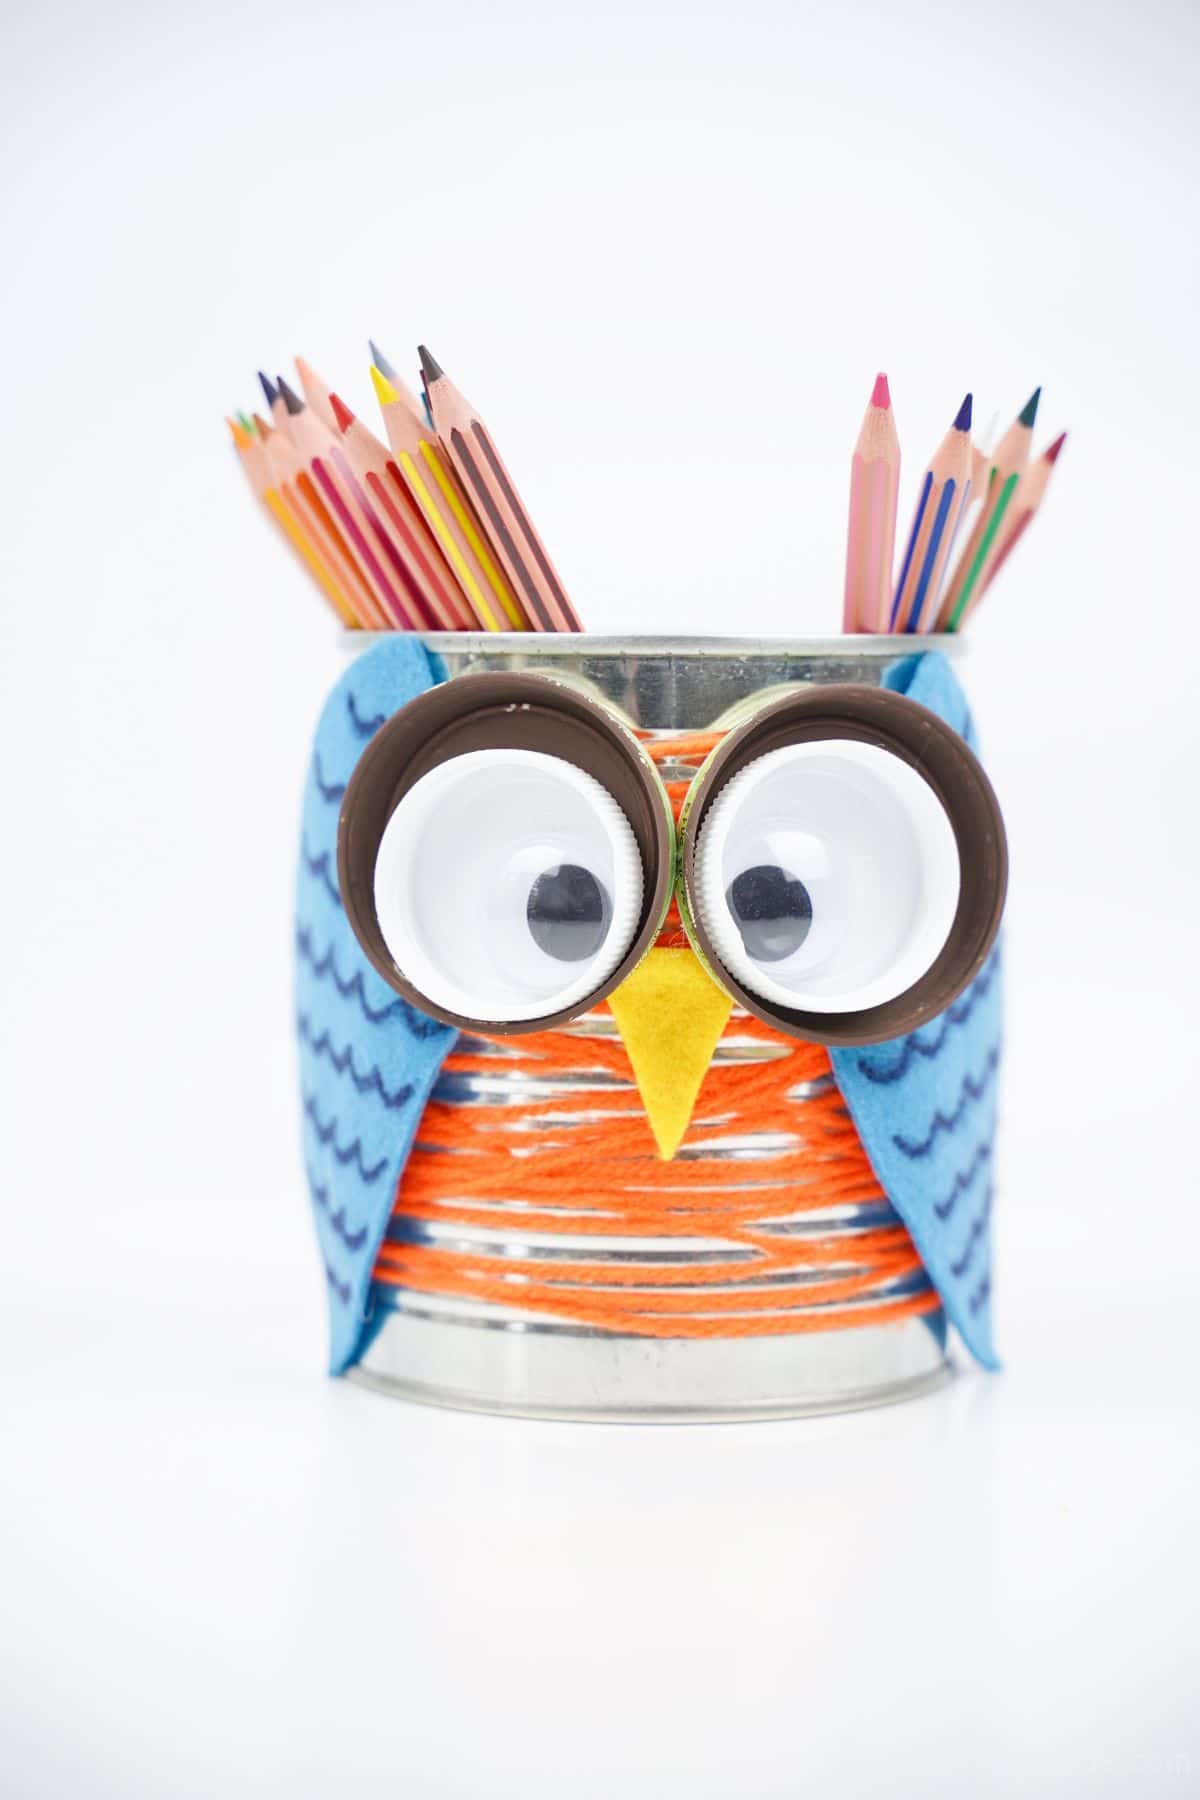 tin can owl pencil holder filled with colored pencils on white table